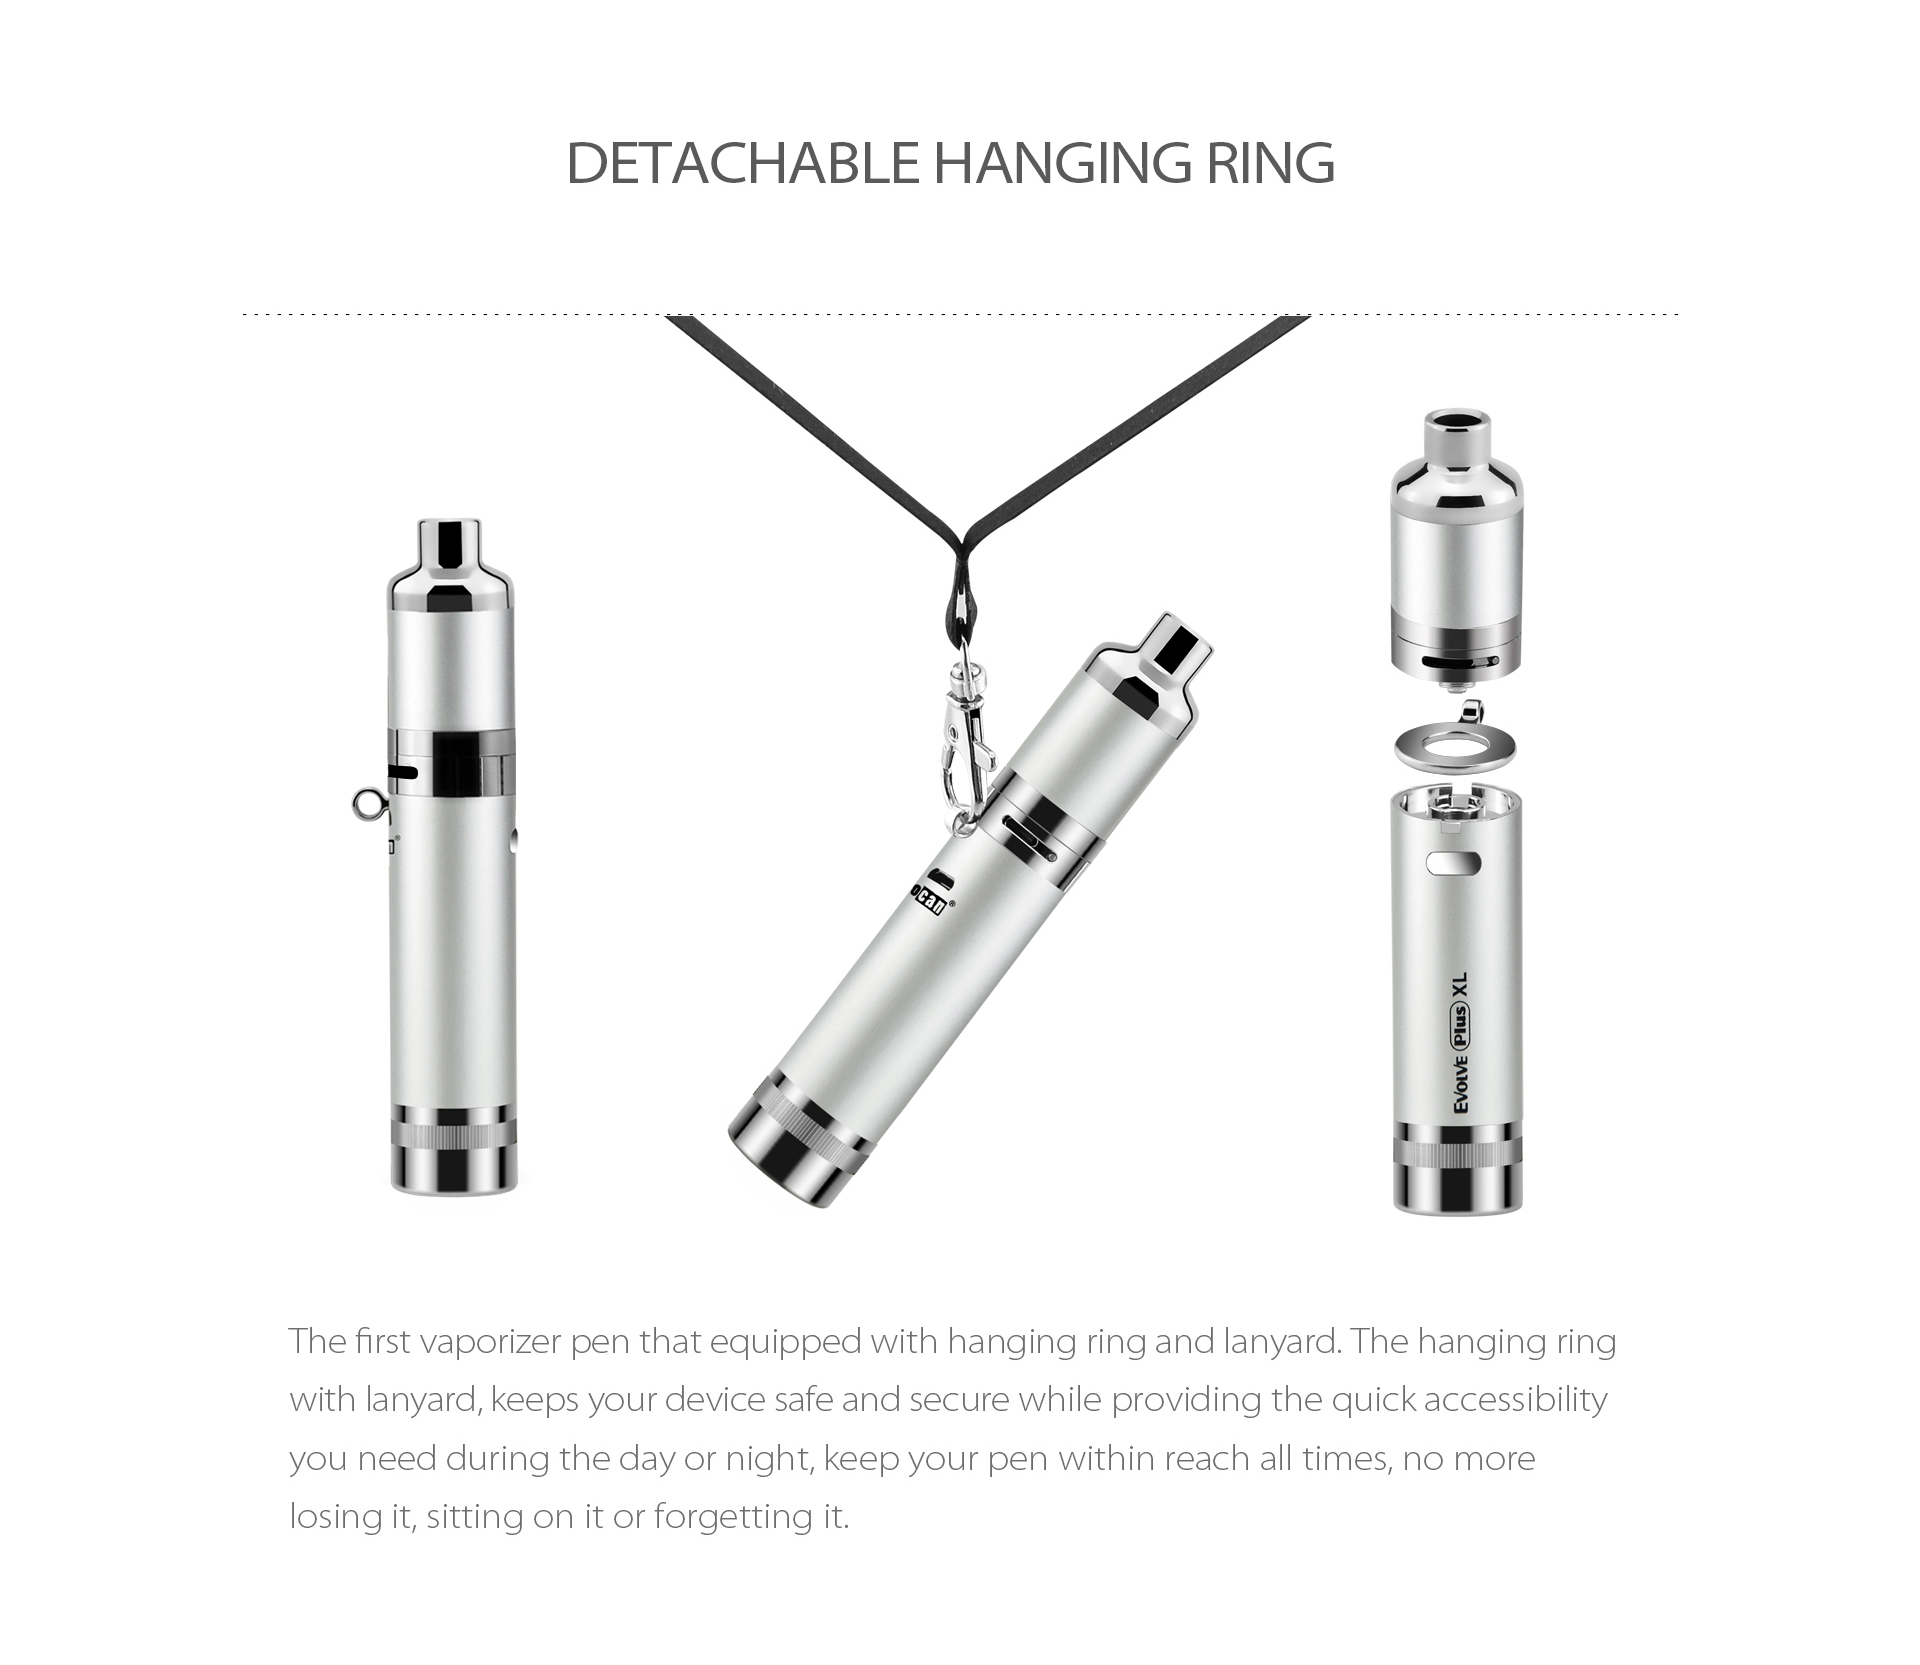 Yocan Evolve Plus XL Vaporizer 2020 version is the first vaporizer pen that equipped with hanging ring and lanyard.